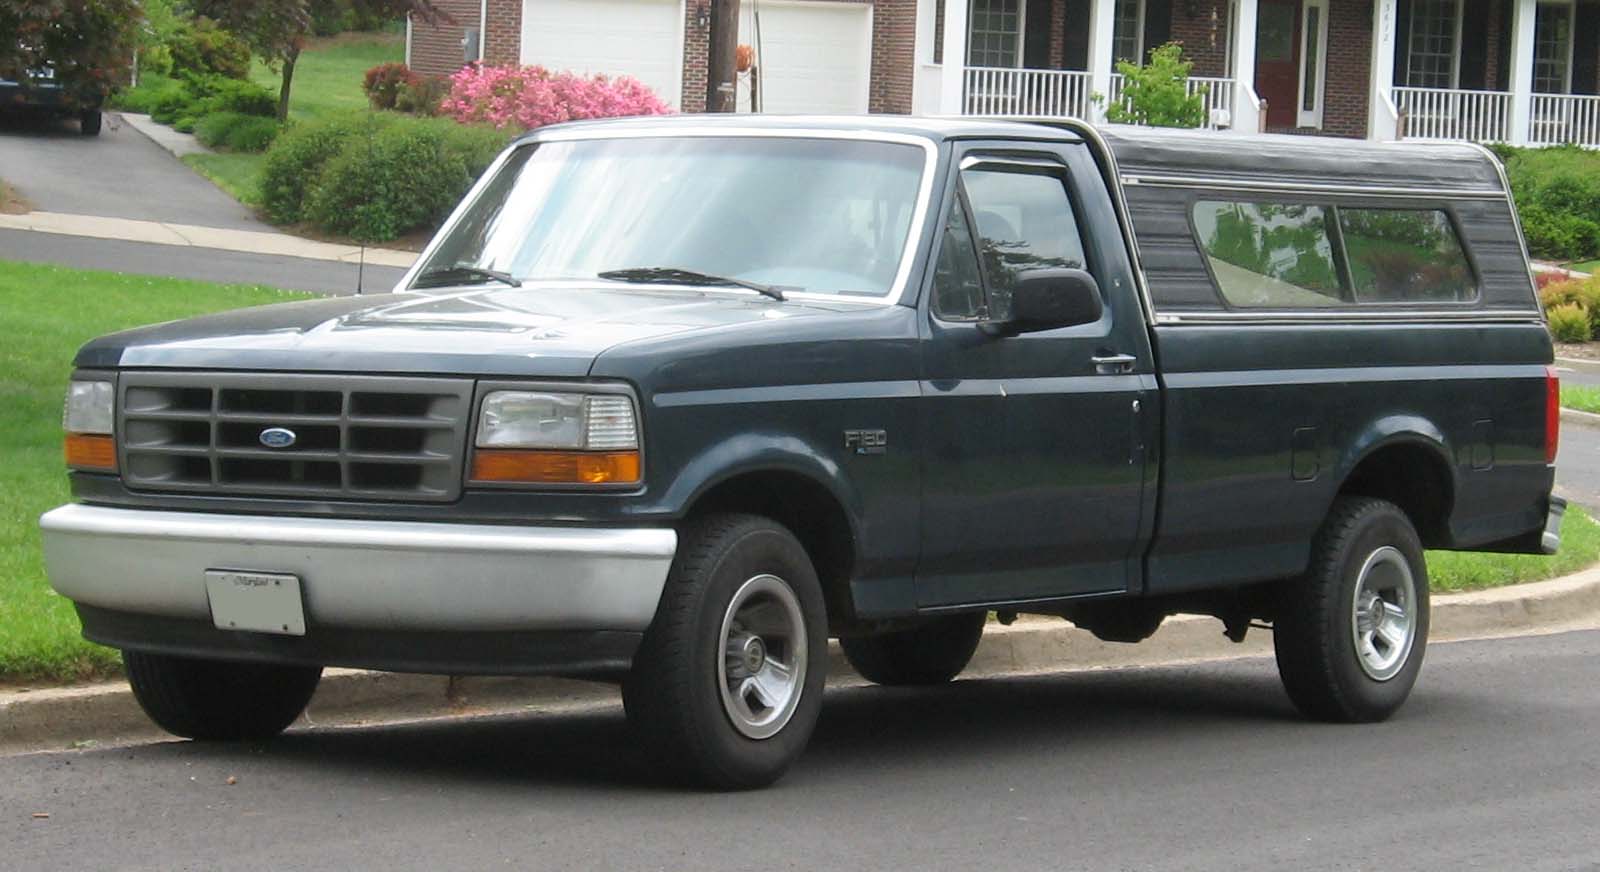 1992 Ford ranger truck parts